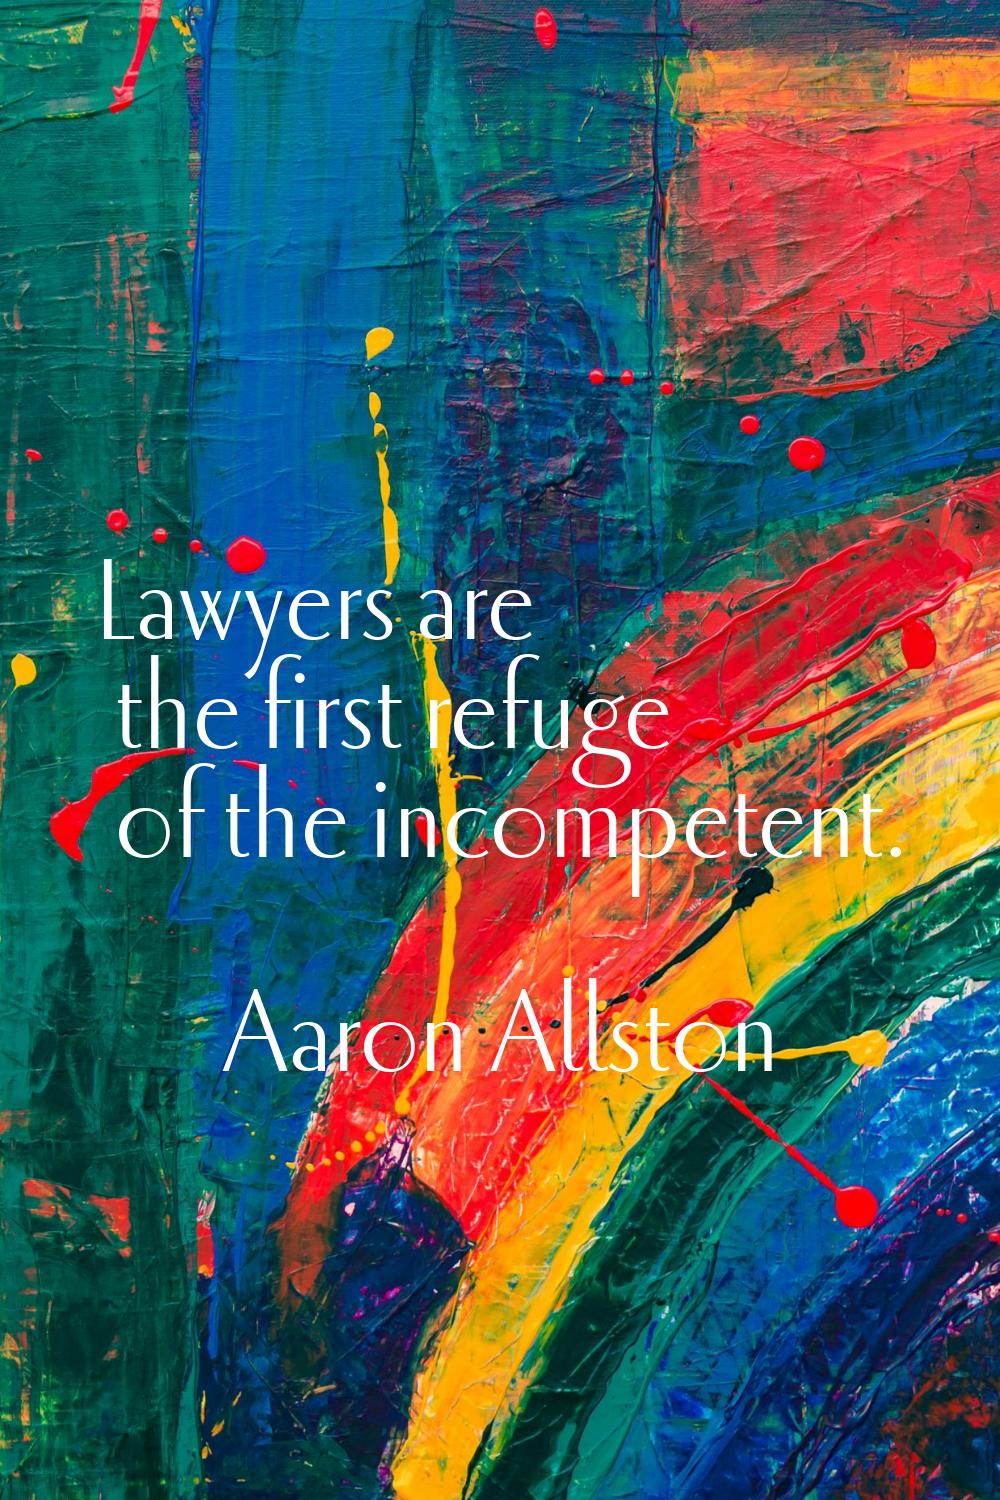 Lawyers are the first refuge of the incompetent.